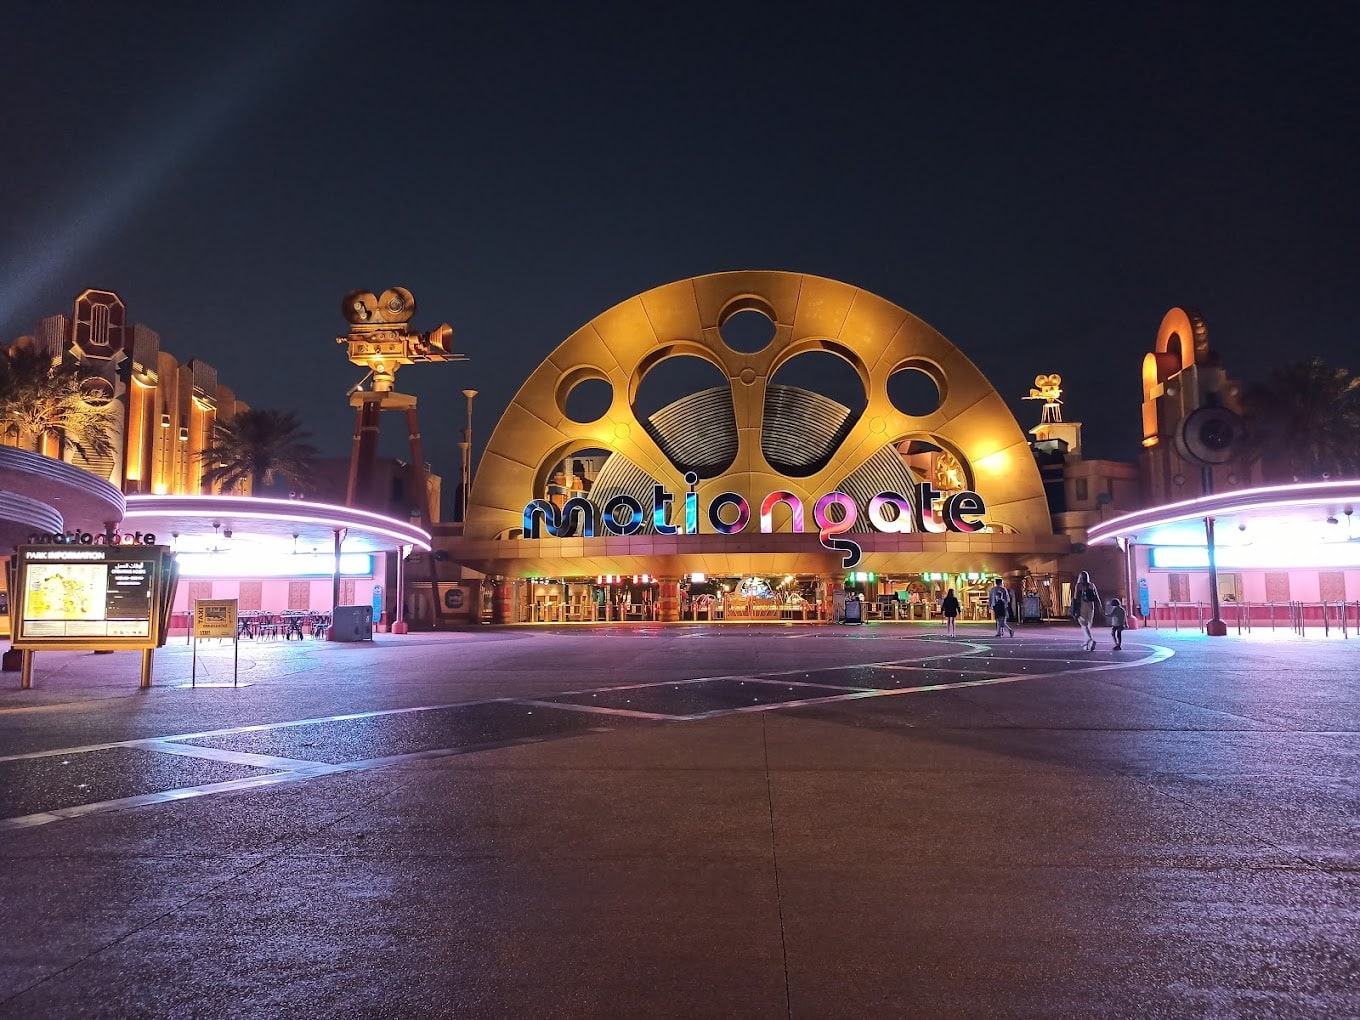 Motiongate Dubai Theme Park- Attractions, Tickets & Prices